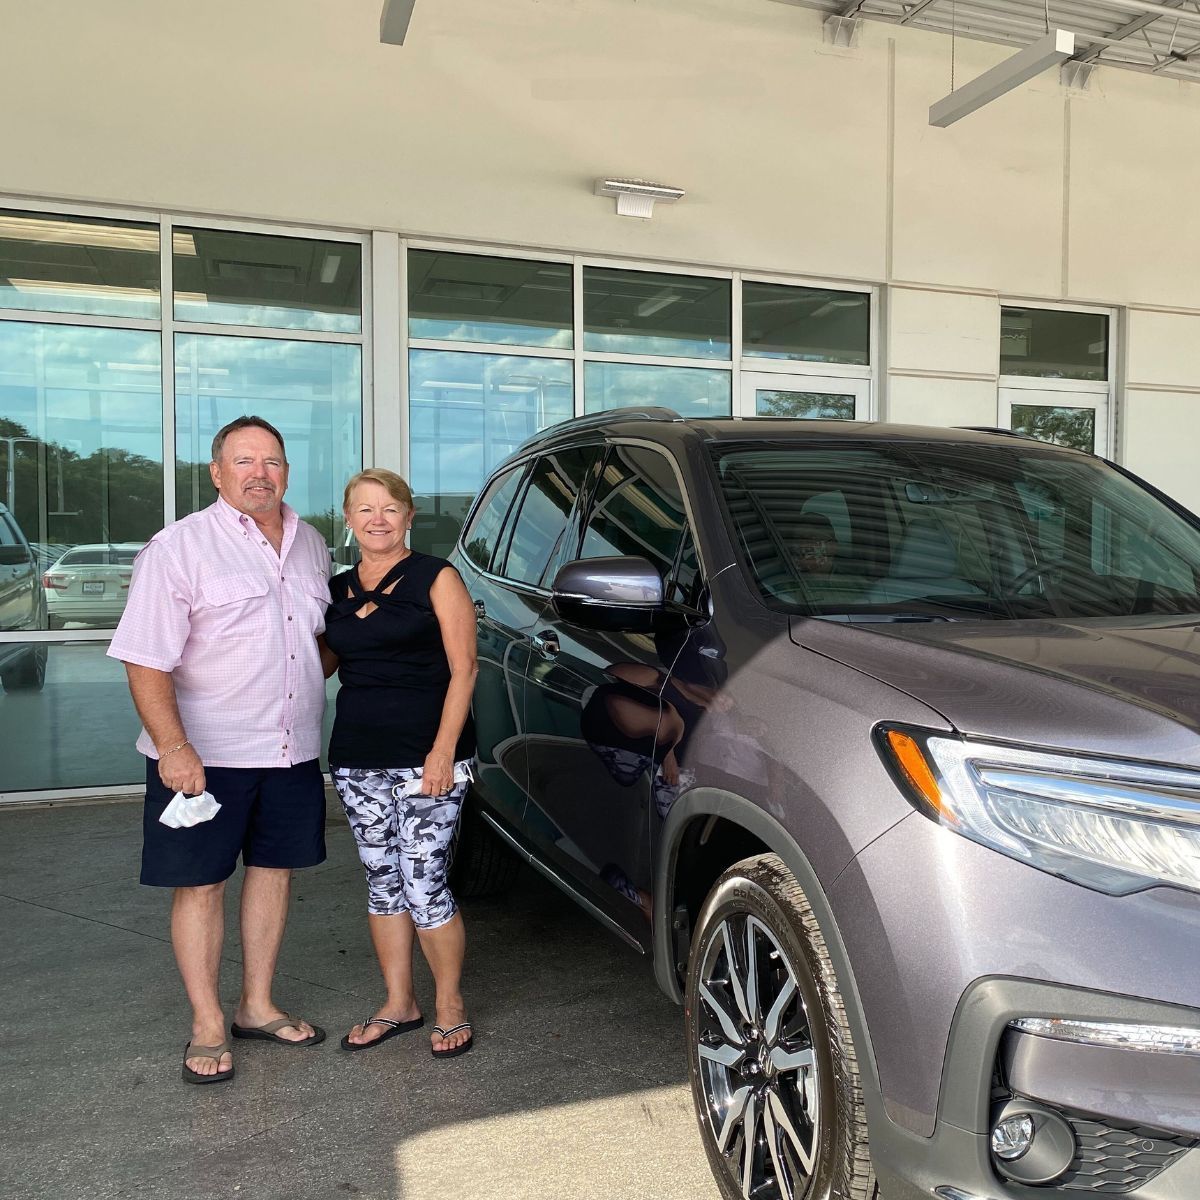 Thank you for choosing Hill Country Honda! We value your feedback and are here to assist you. Our goal is to provide exceptional service and continue to serve you with care. Call or Text (210) 457-5527